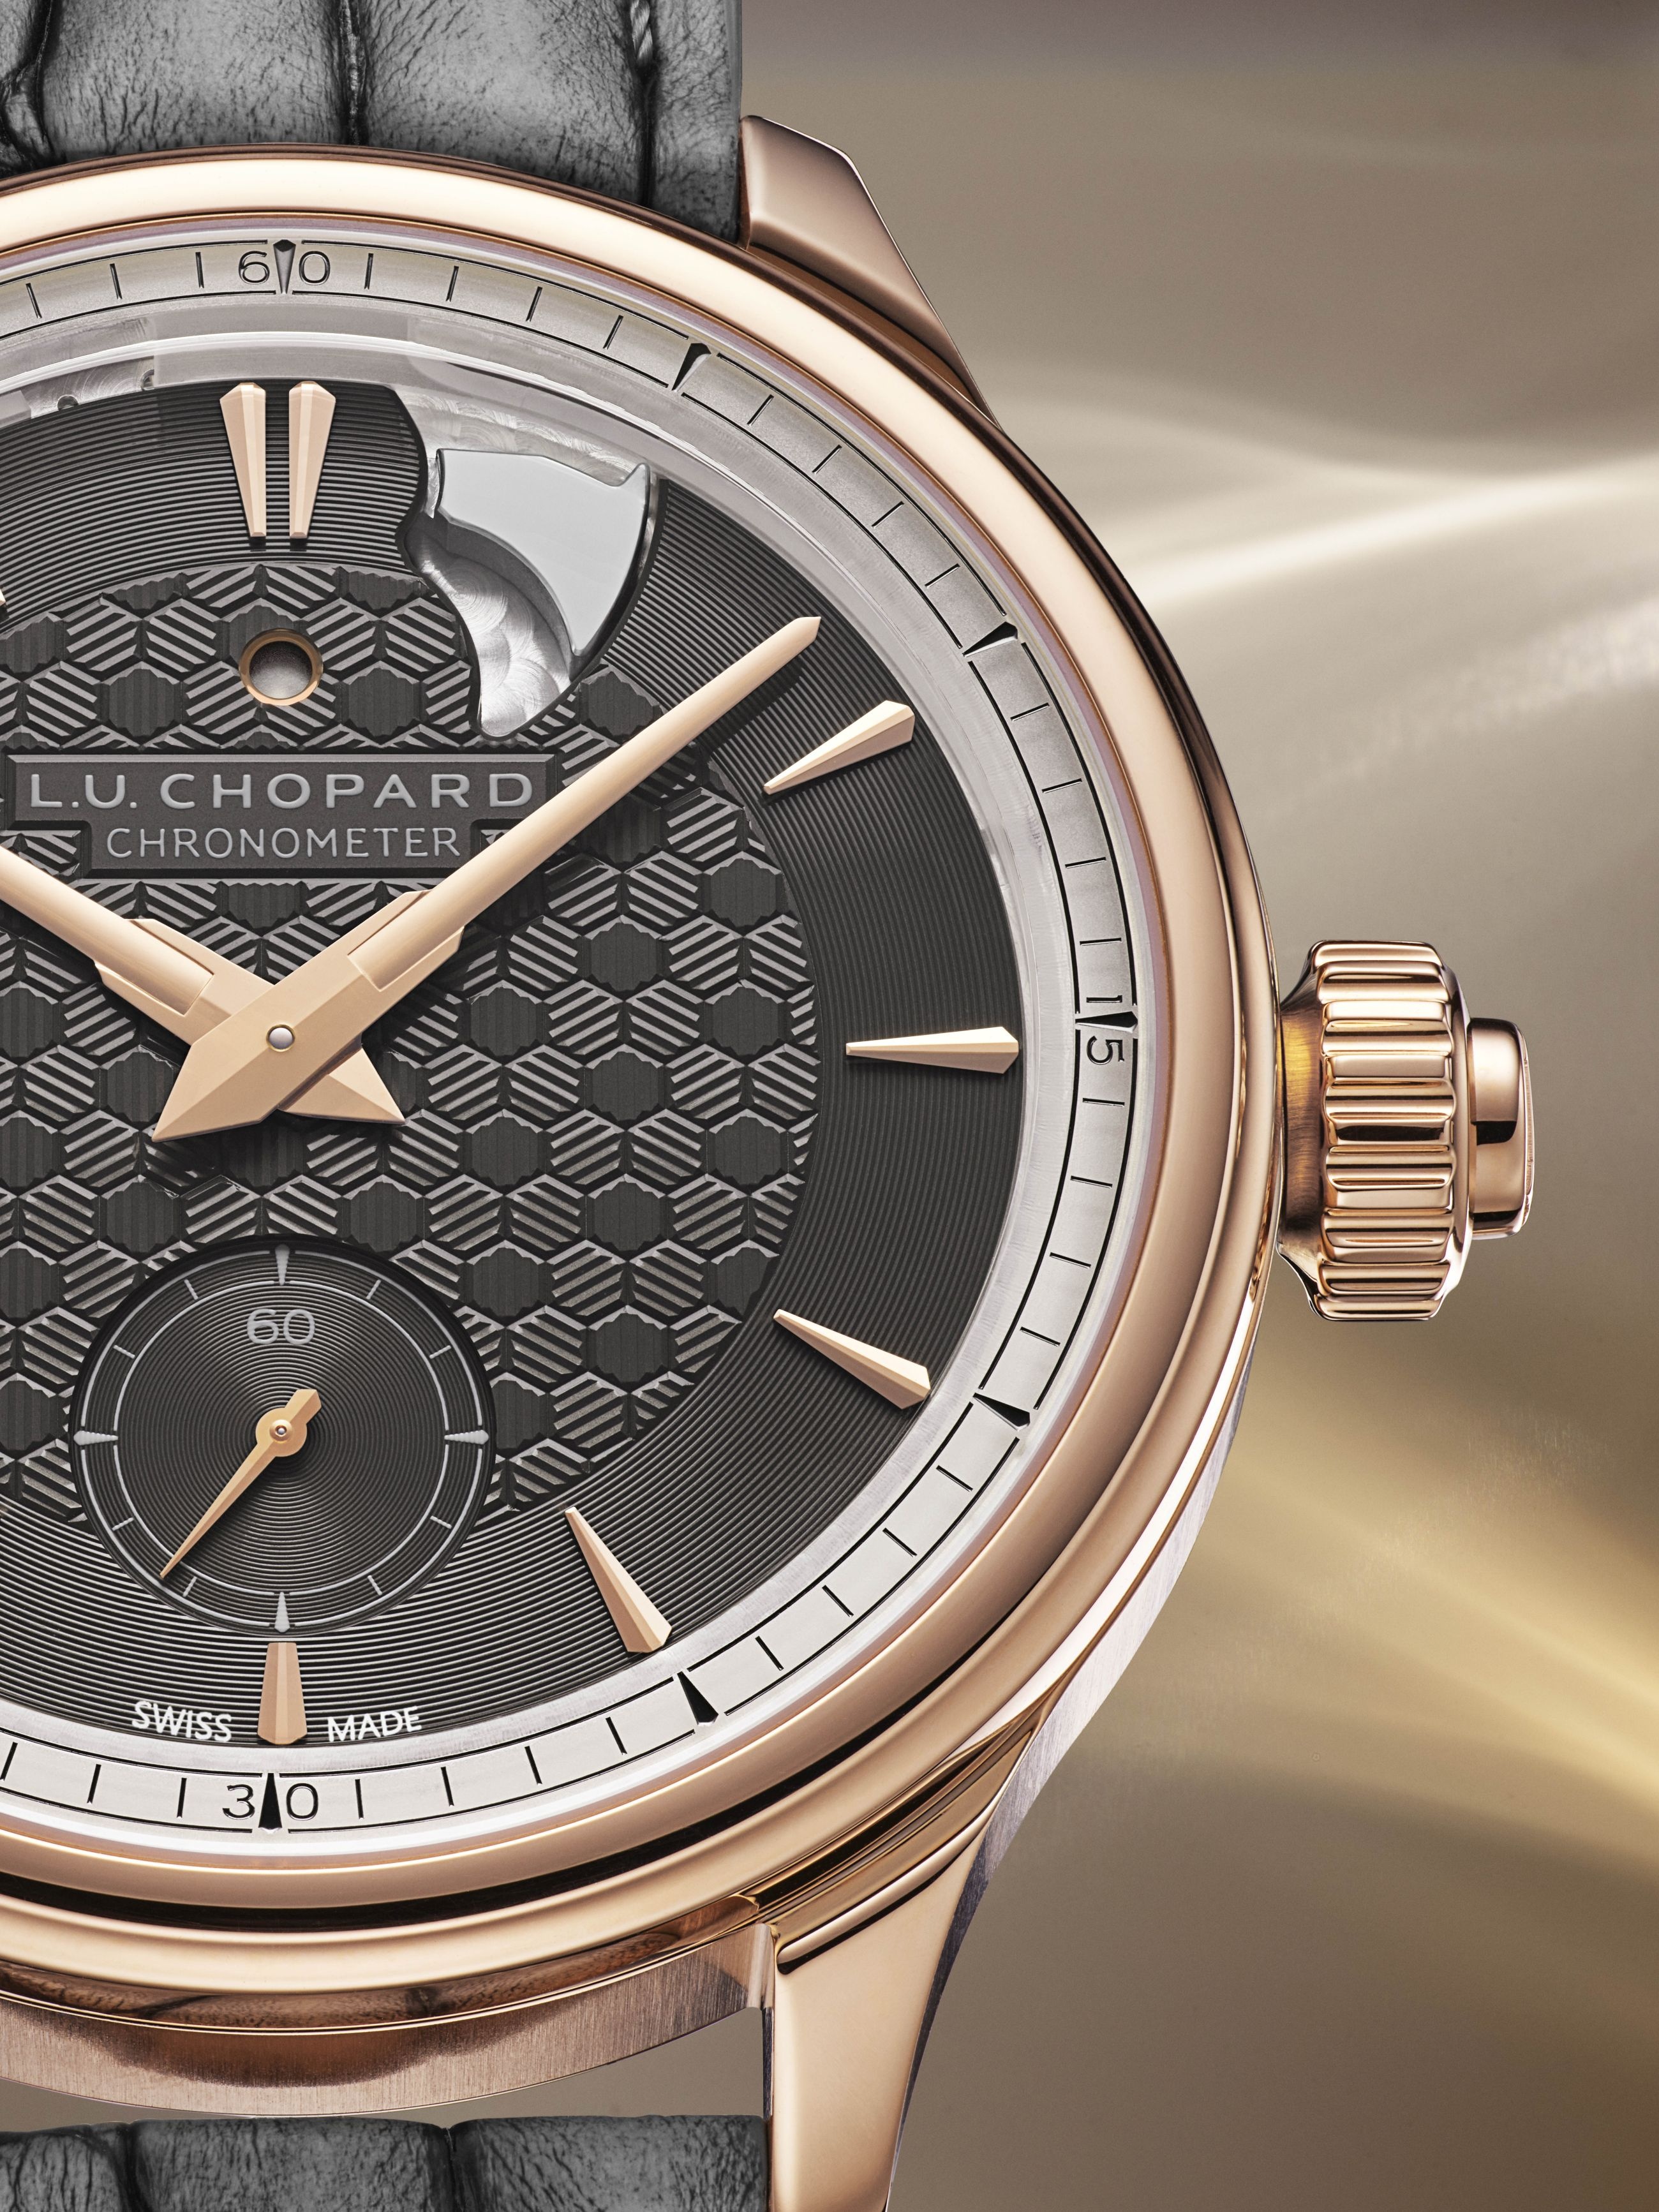 Chopard - L.U.C XPS Spirit of Nature, Time and Watches